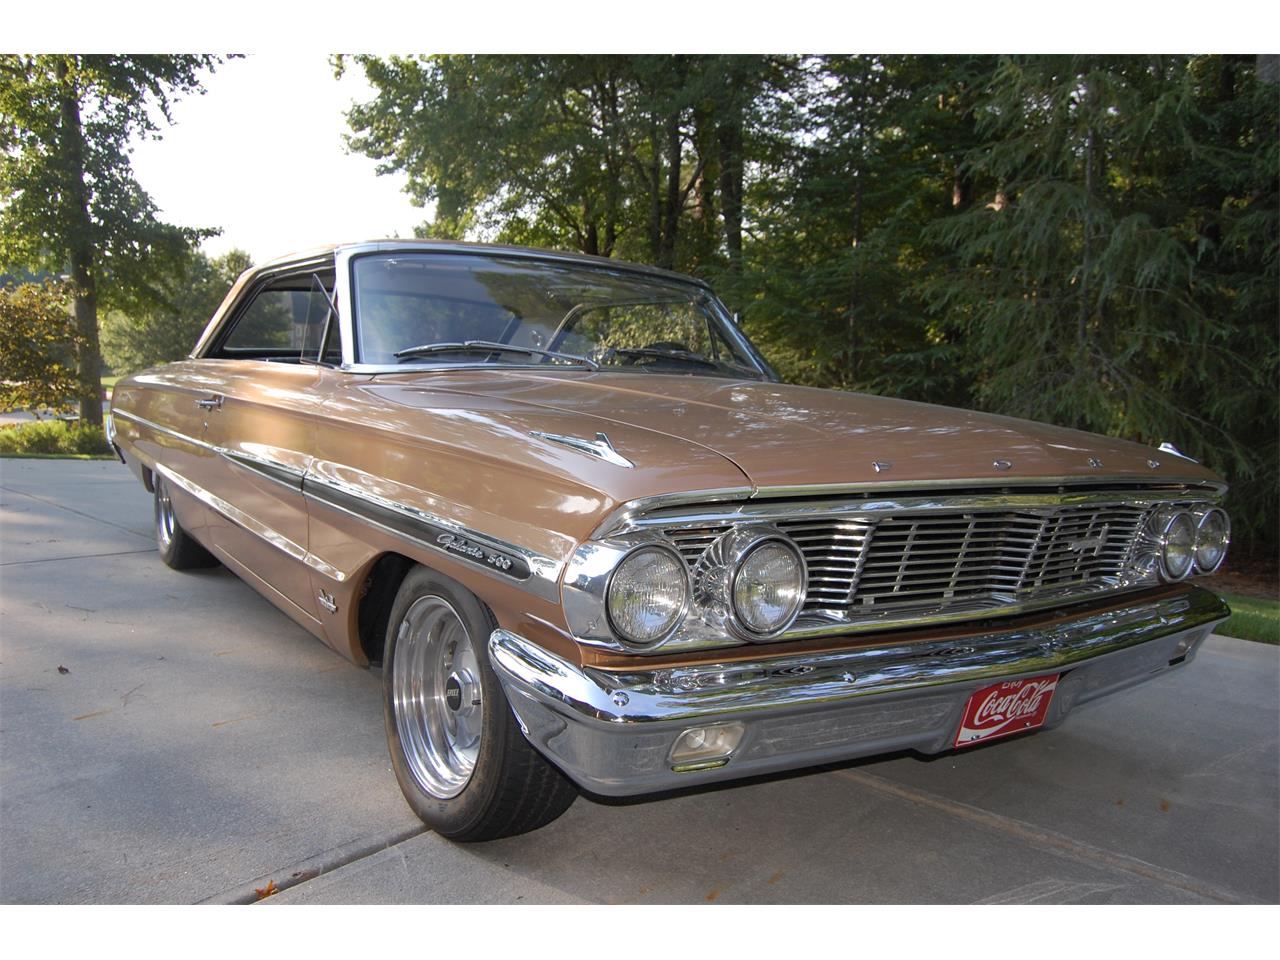 1964 Ford Galaxie 500 for Sale | ClassicCars.com | CC-1099542